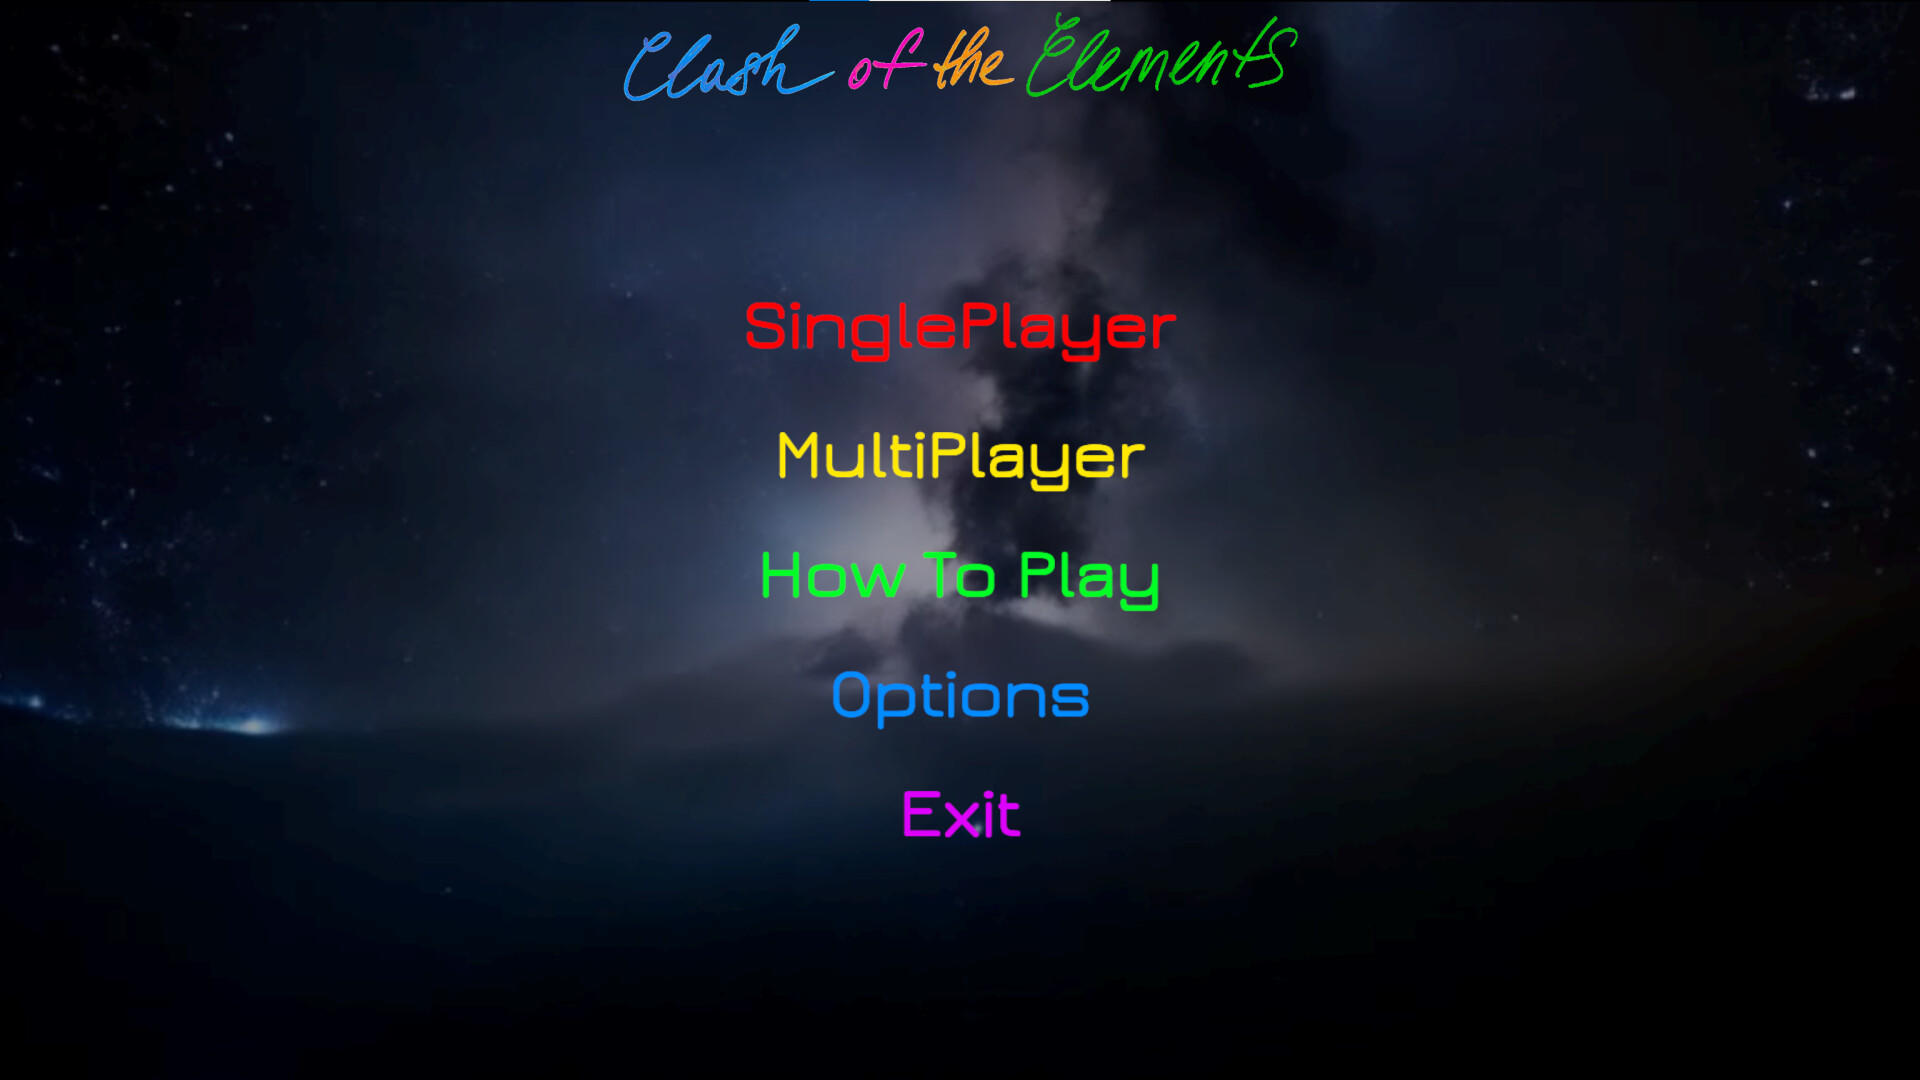 Screenshot 1 of Clash of the Elements 